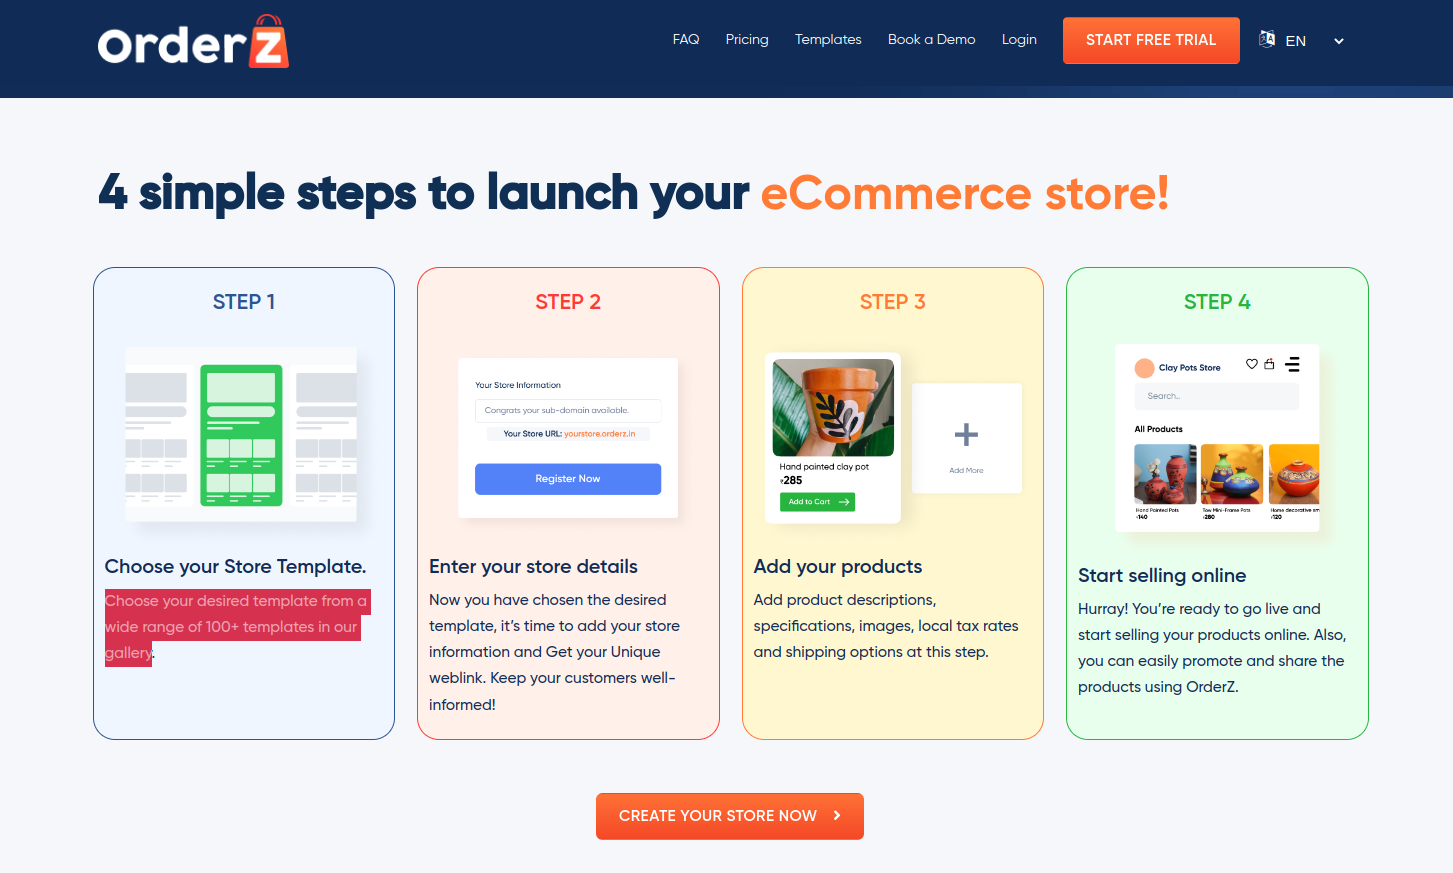 4 simple steps to launch your eCommerce store!